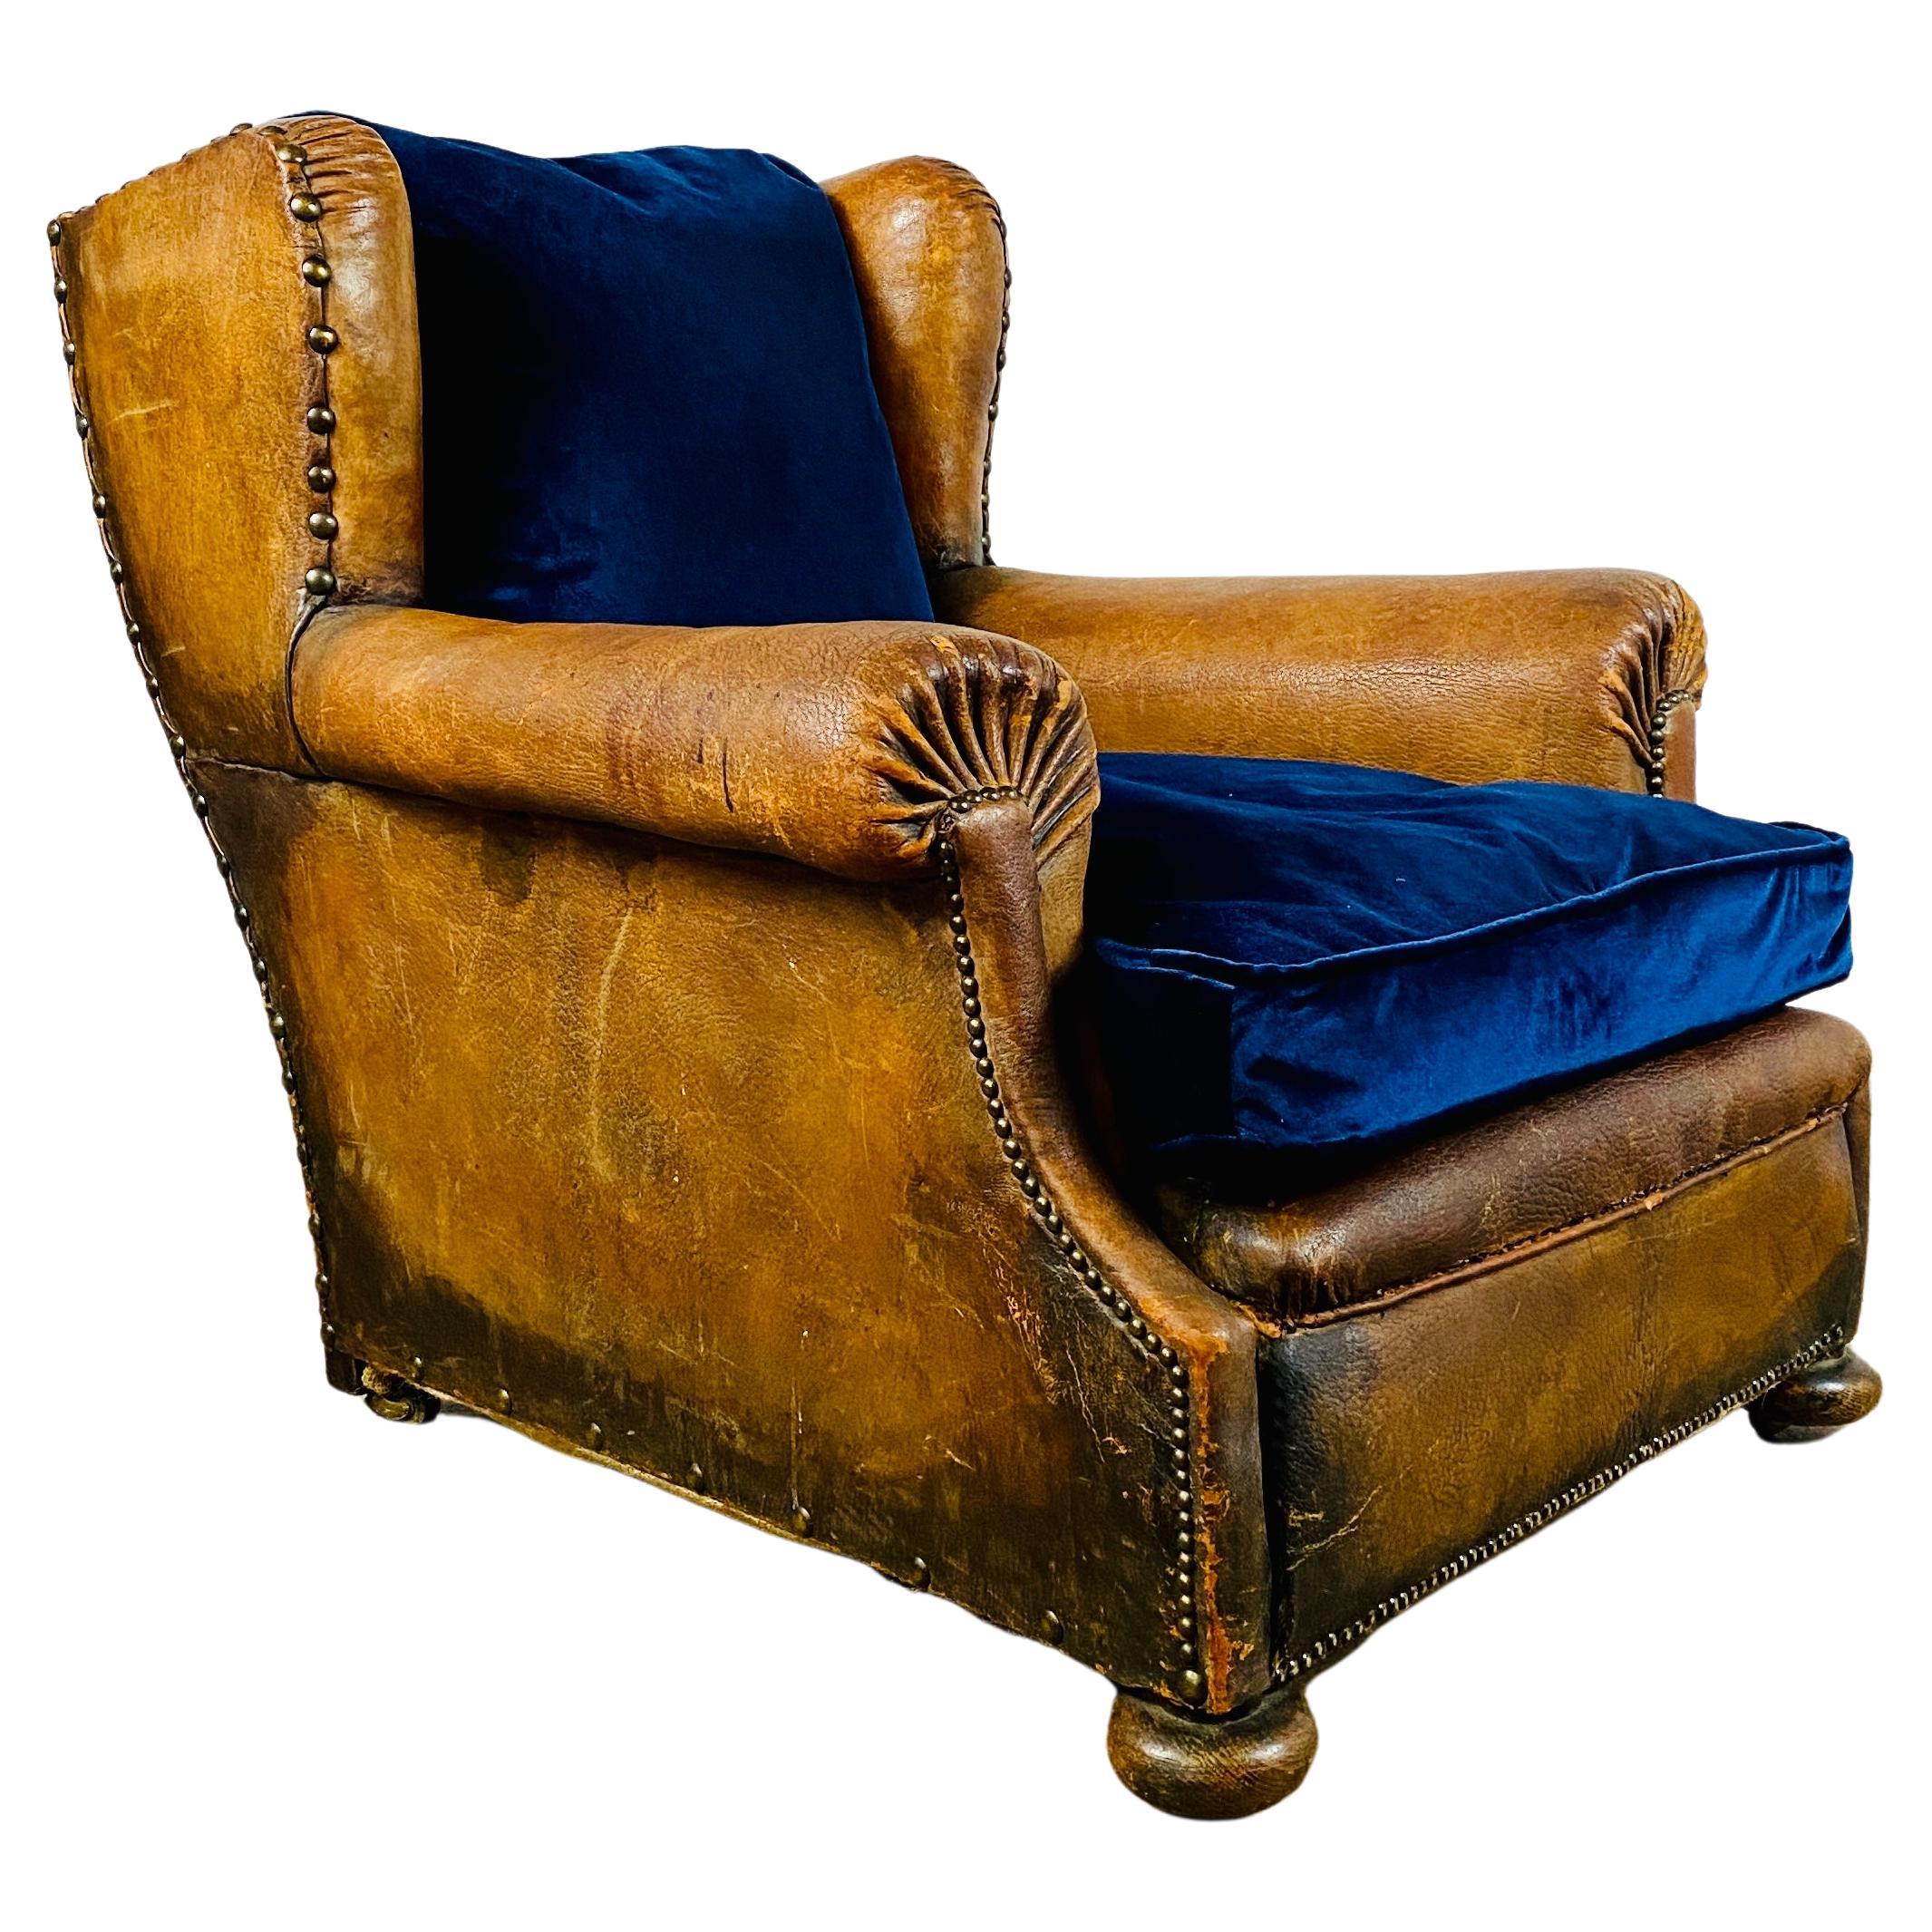 Antique French Leather Club Armchair on Castors, circa 1900s